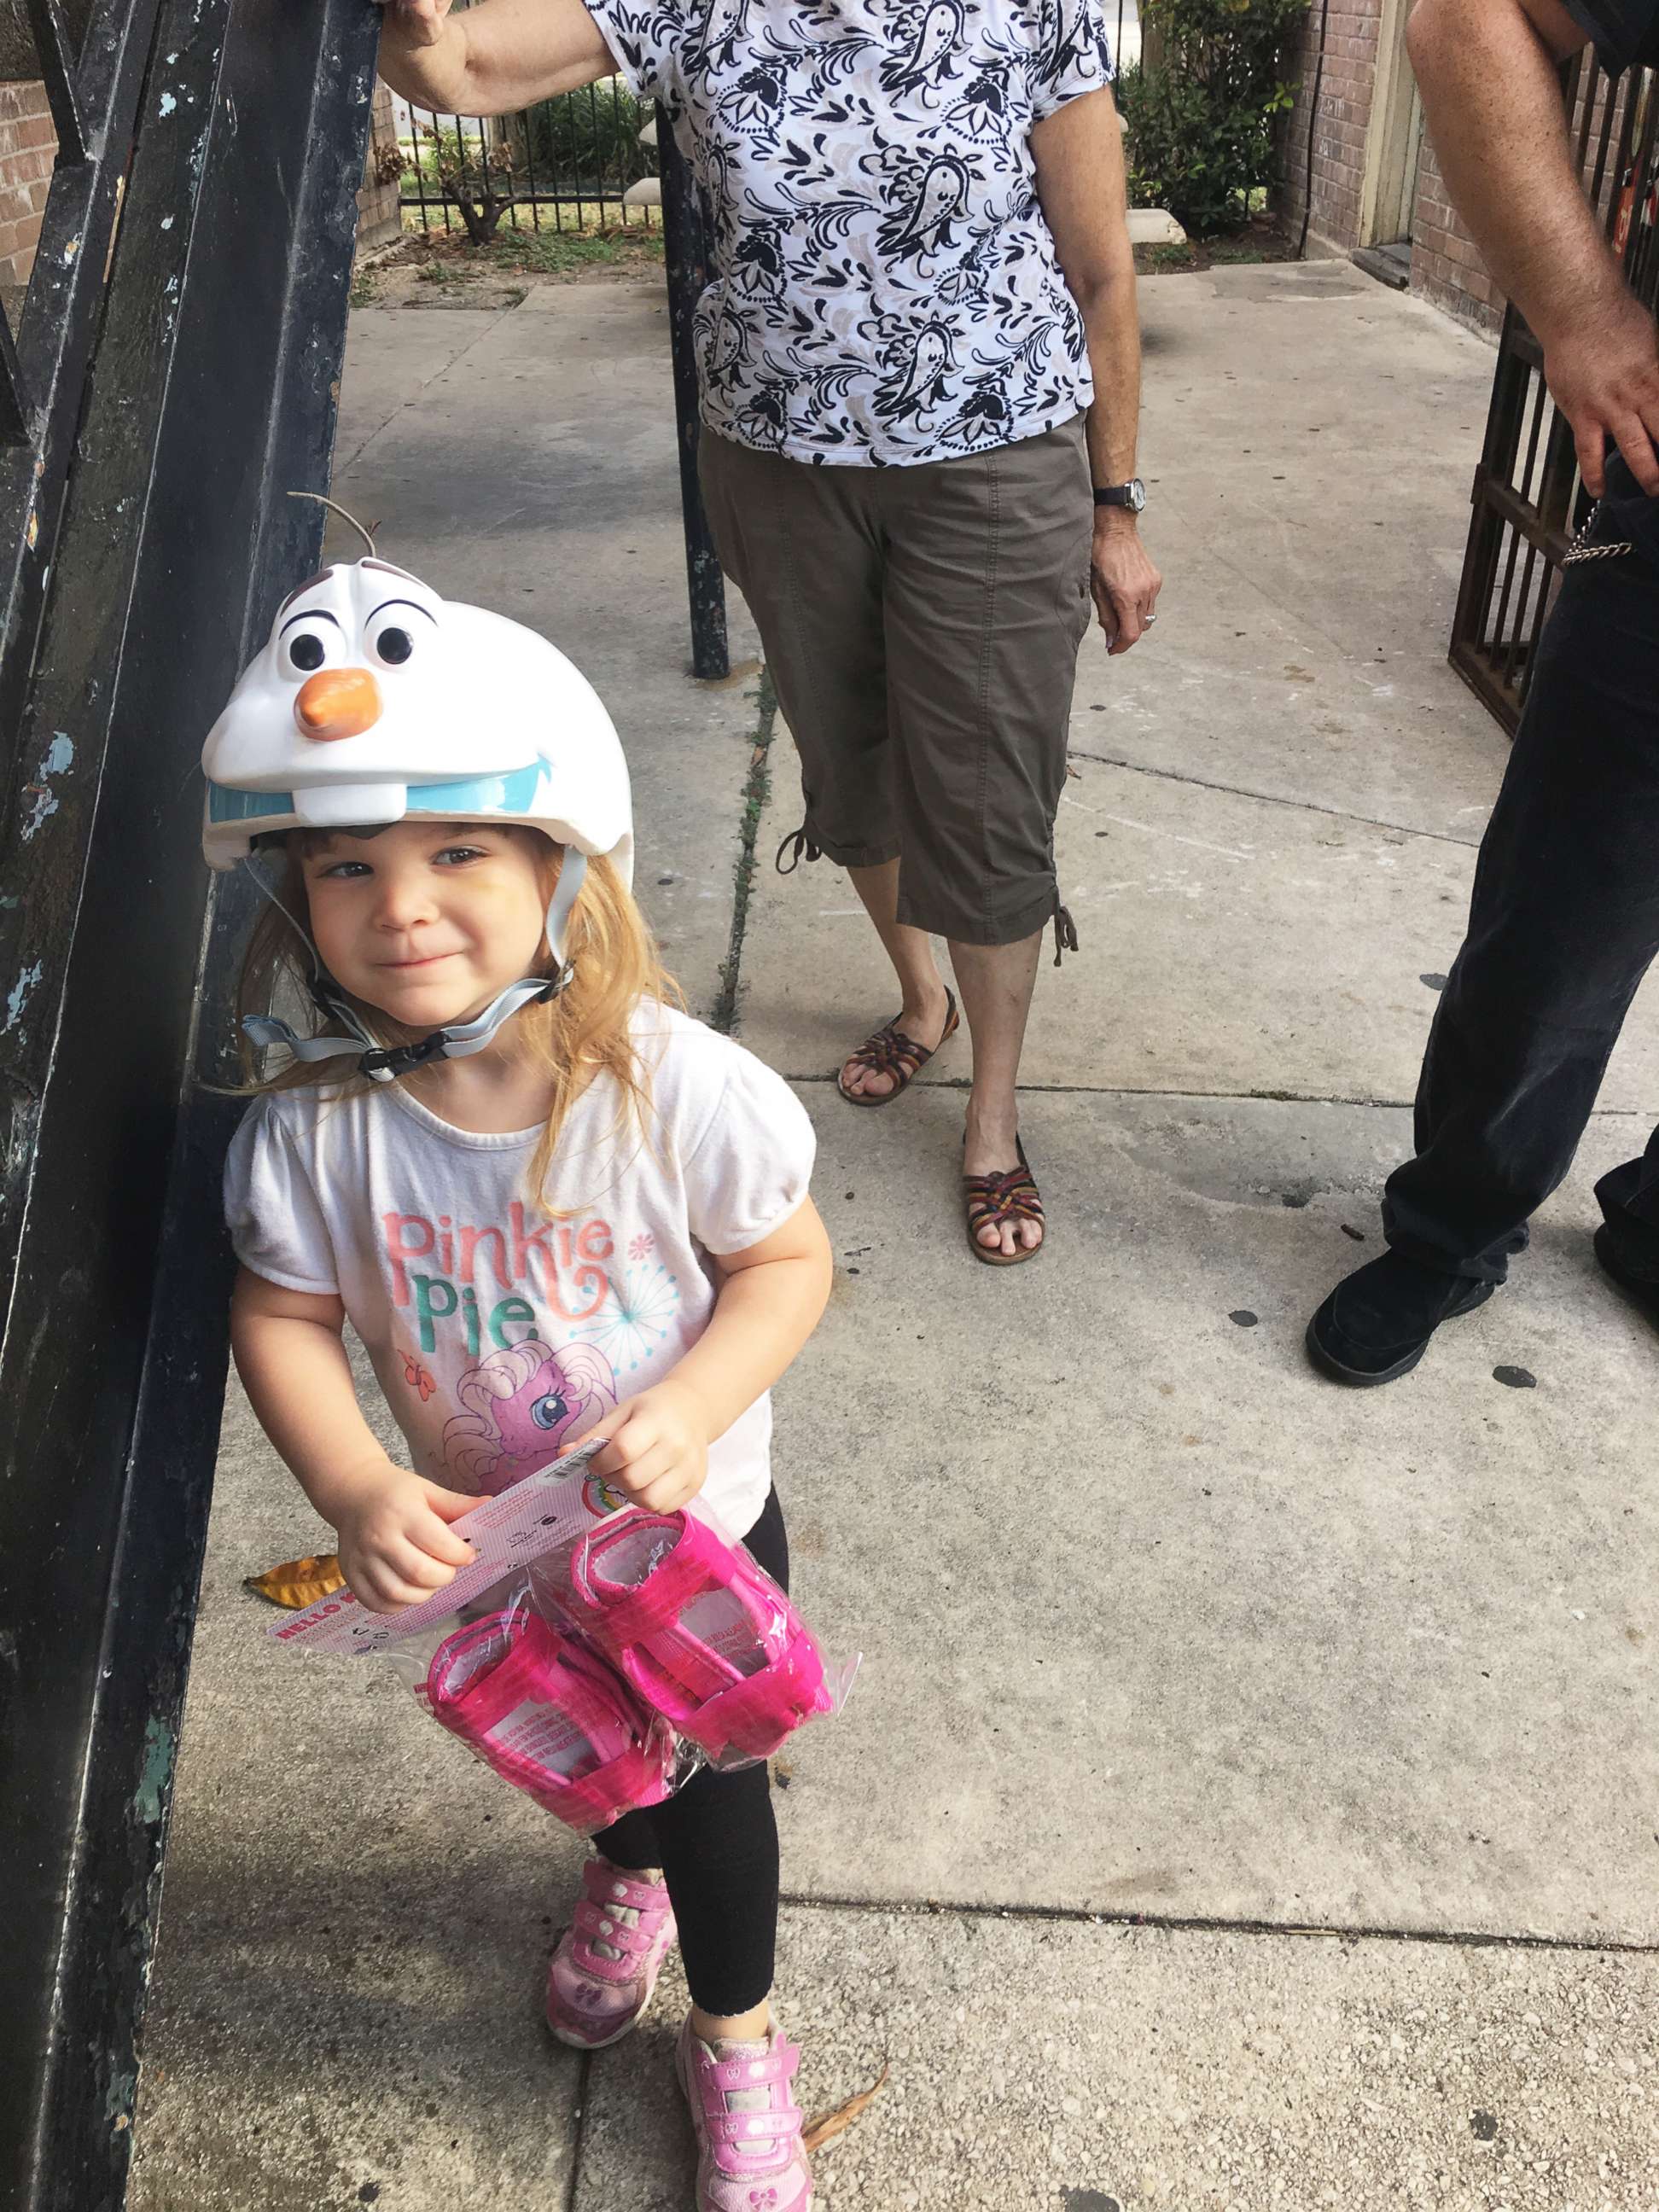 PHOTO: The San Antonio Fire Department surprised Hope Rhoades, 3, with a bike and safety gear after realizing her family couldn't afford one.